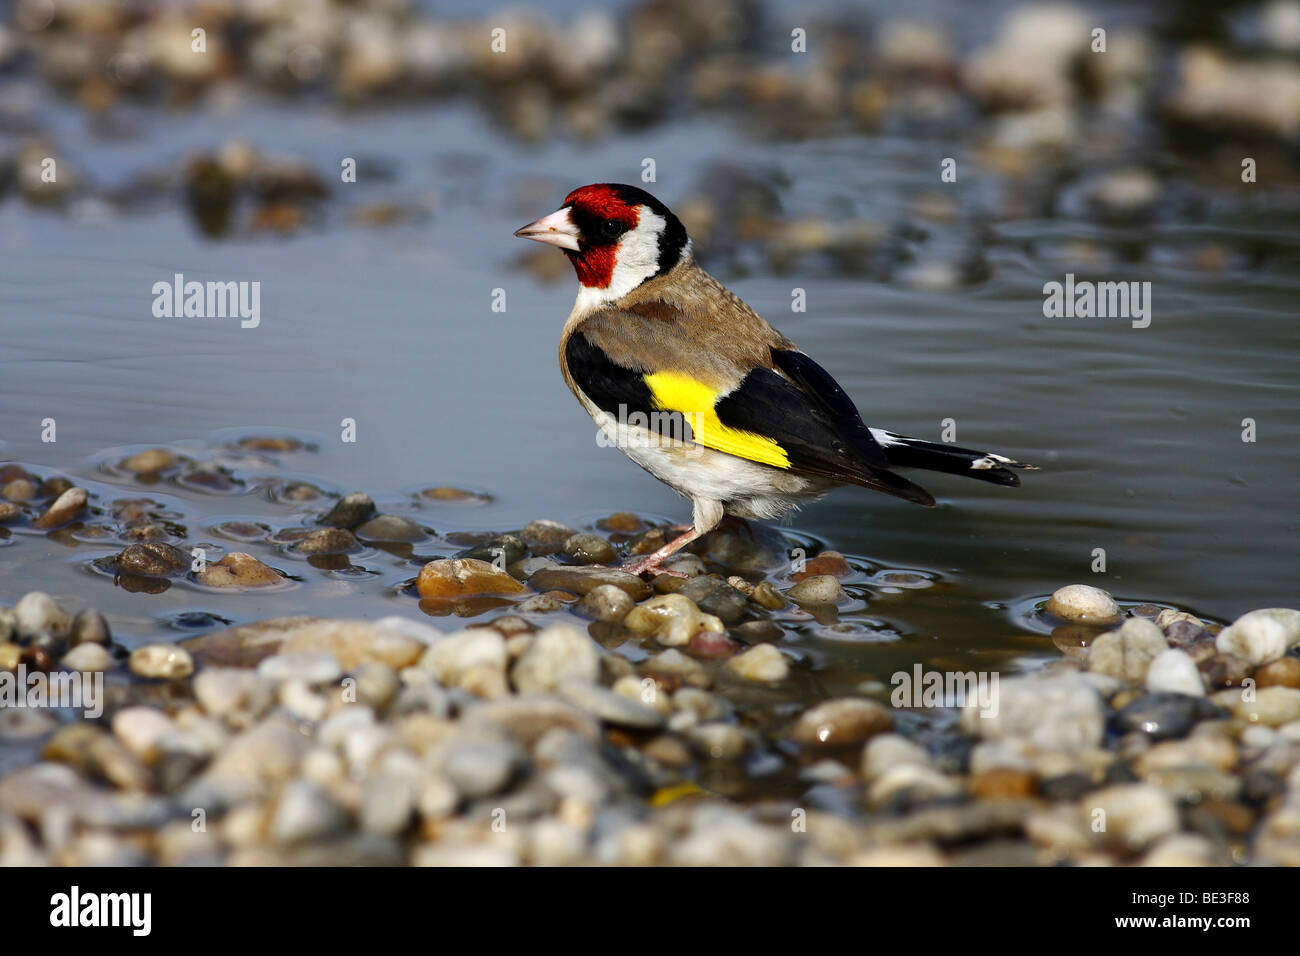 European Goldfinch (Carduelis carduelis) sitting at the edge of a puddle Stock Photo